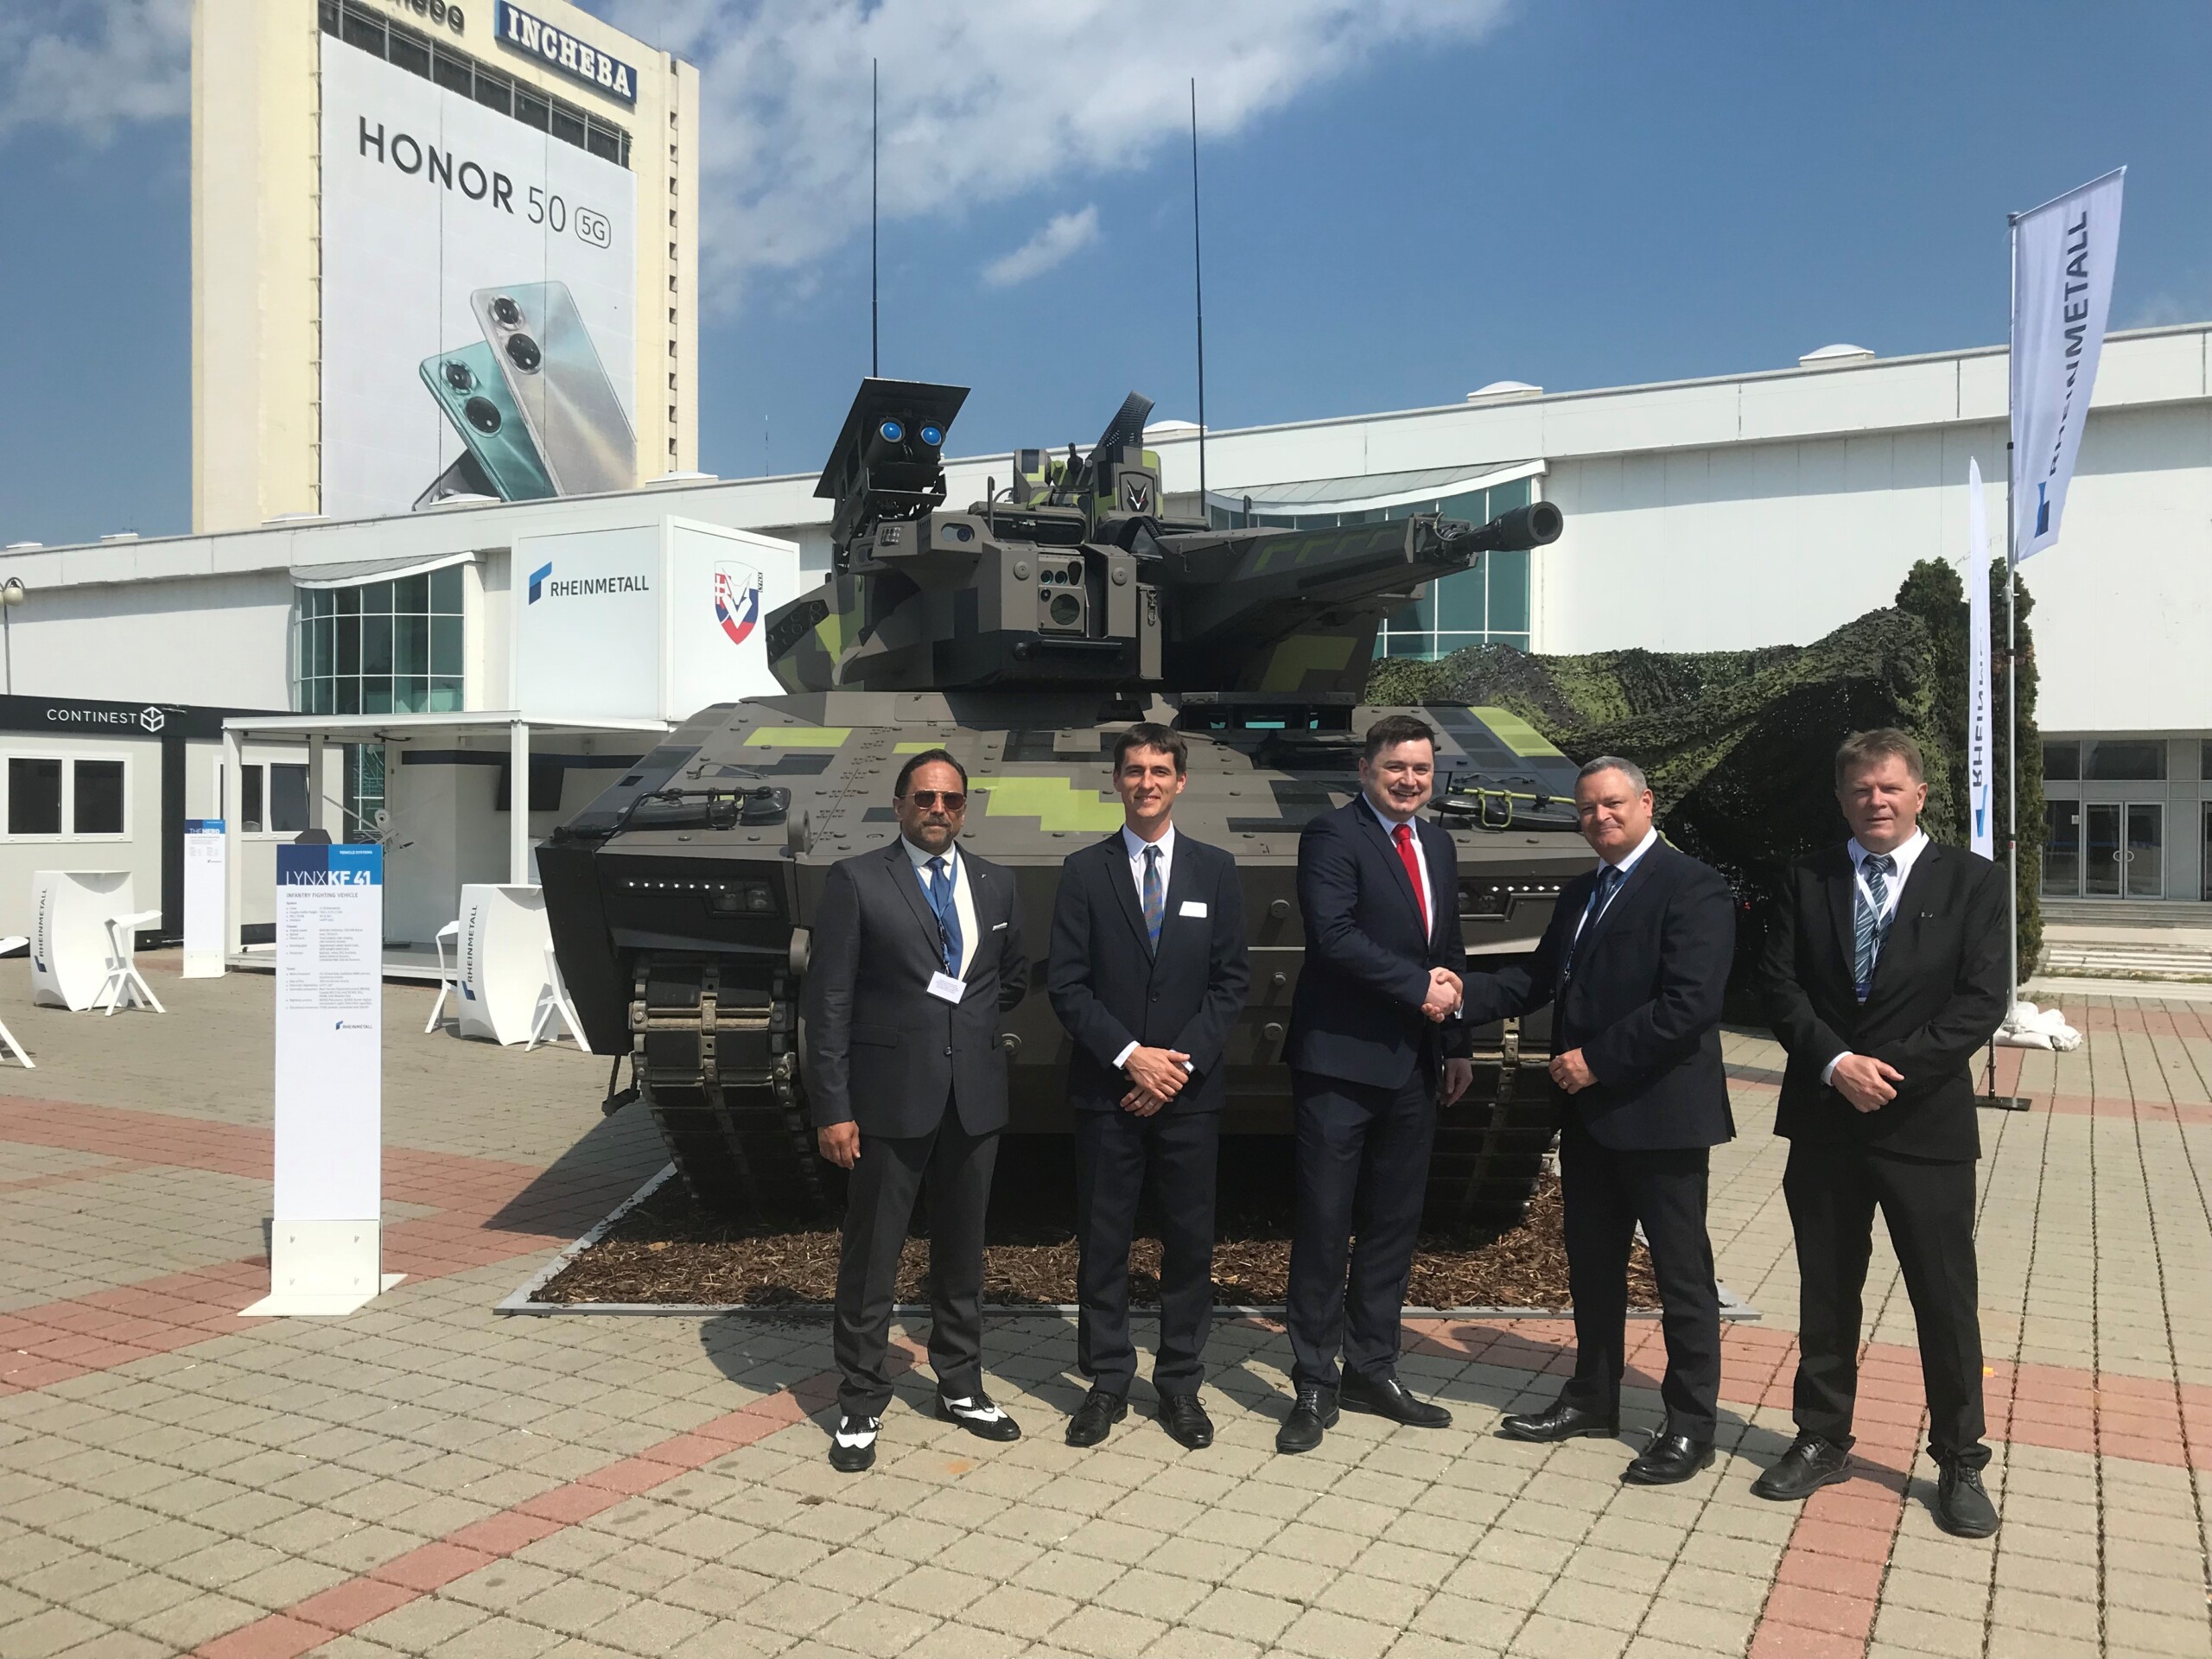 Ray Service and Rheinmetall signed two major contracts